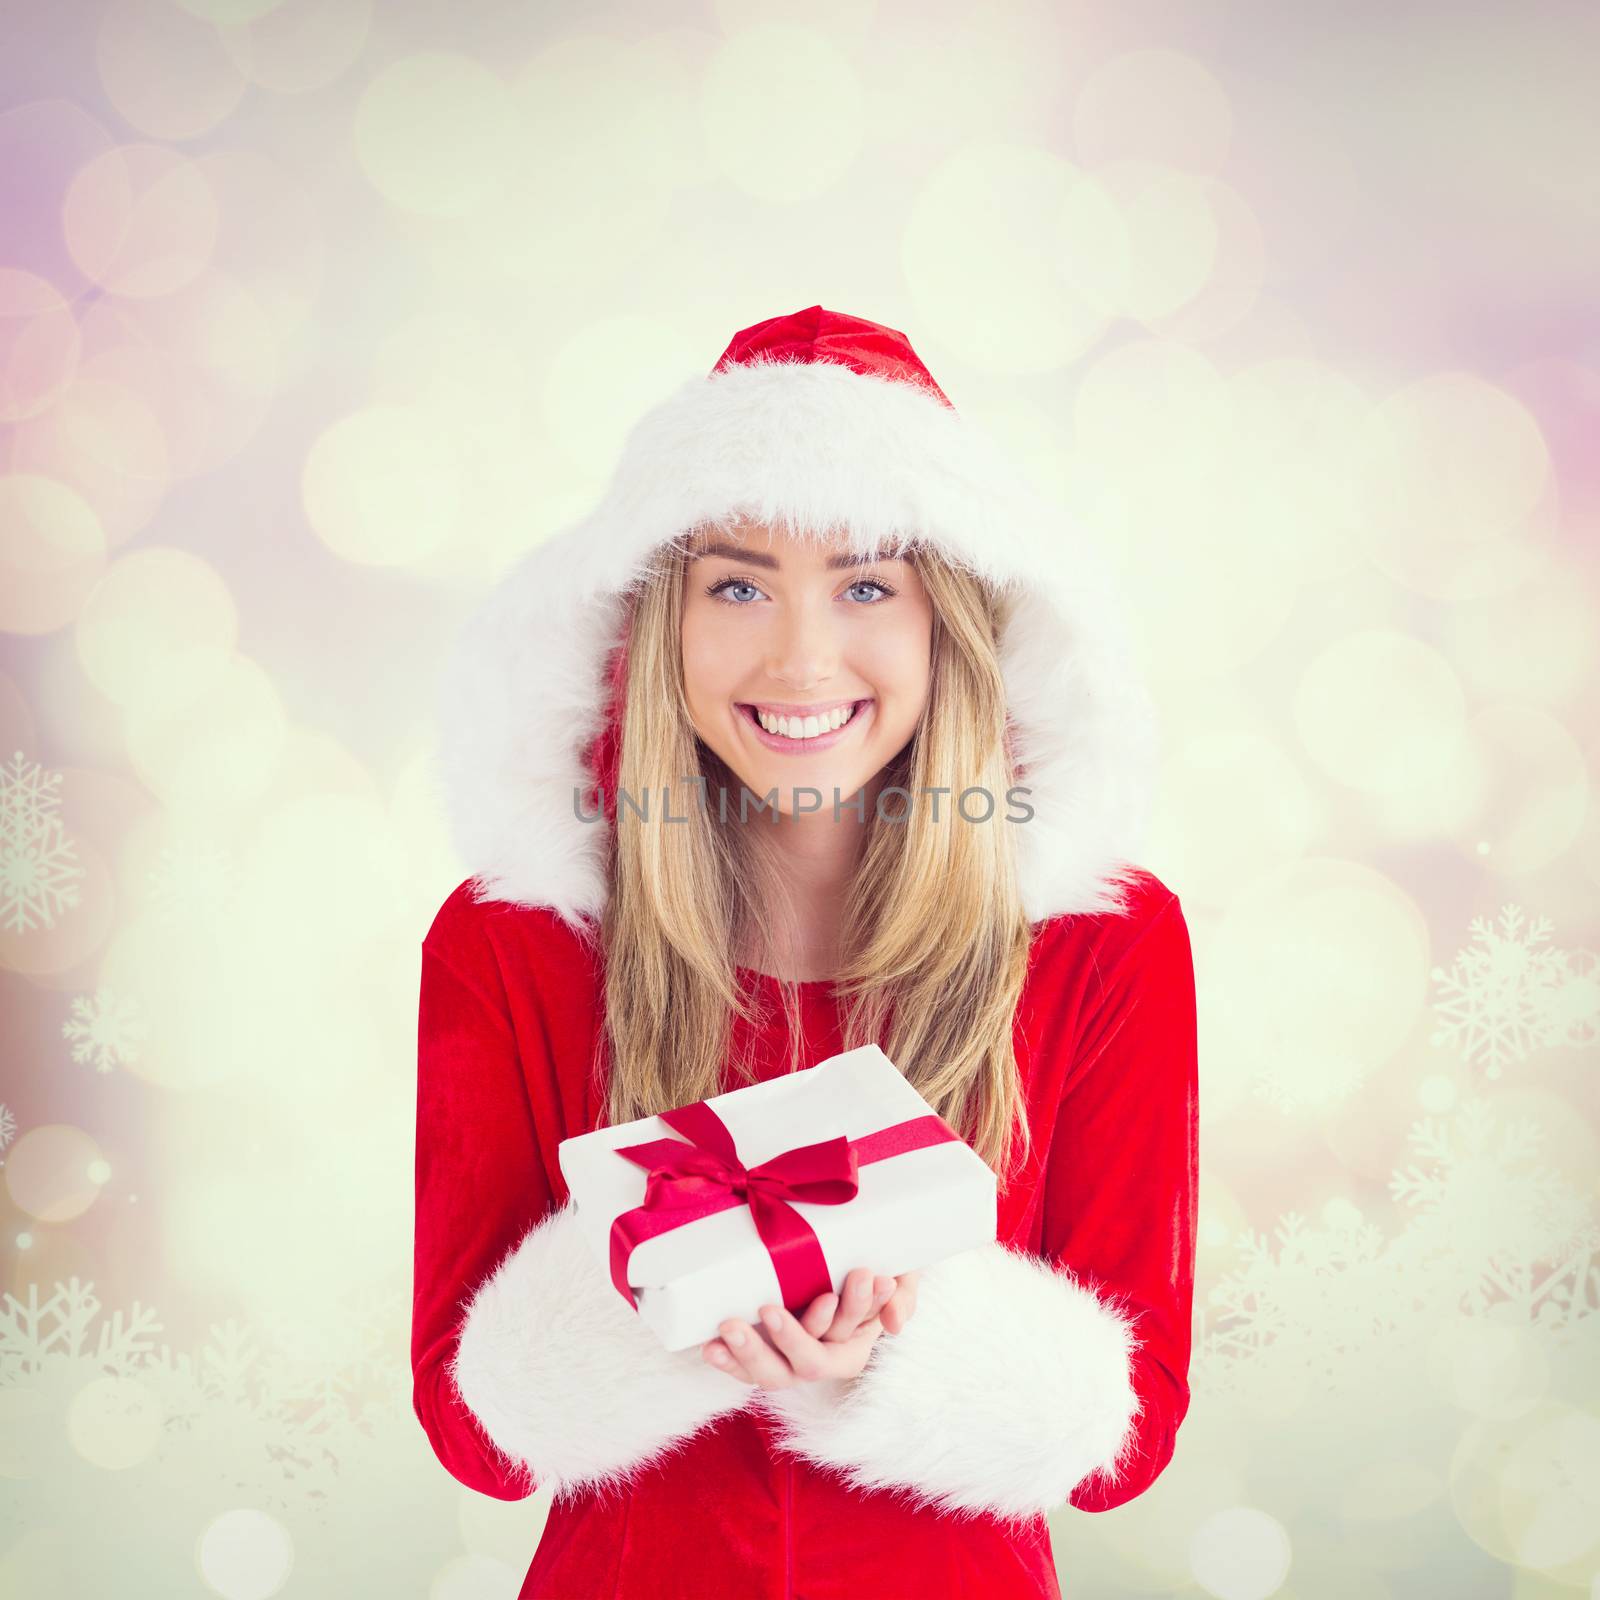 Sexy santa girl holding gift against glowing christmas background